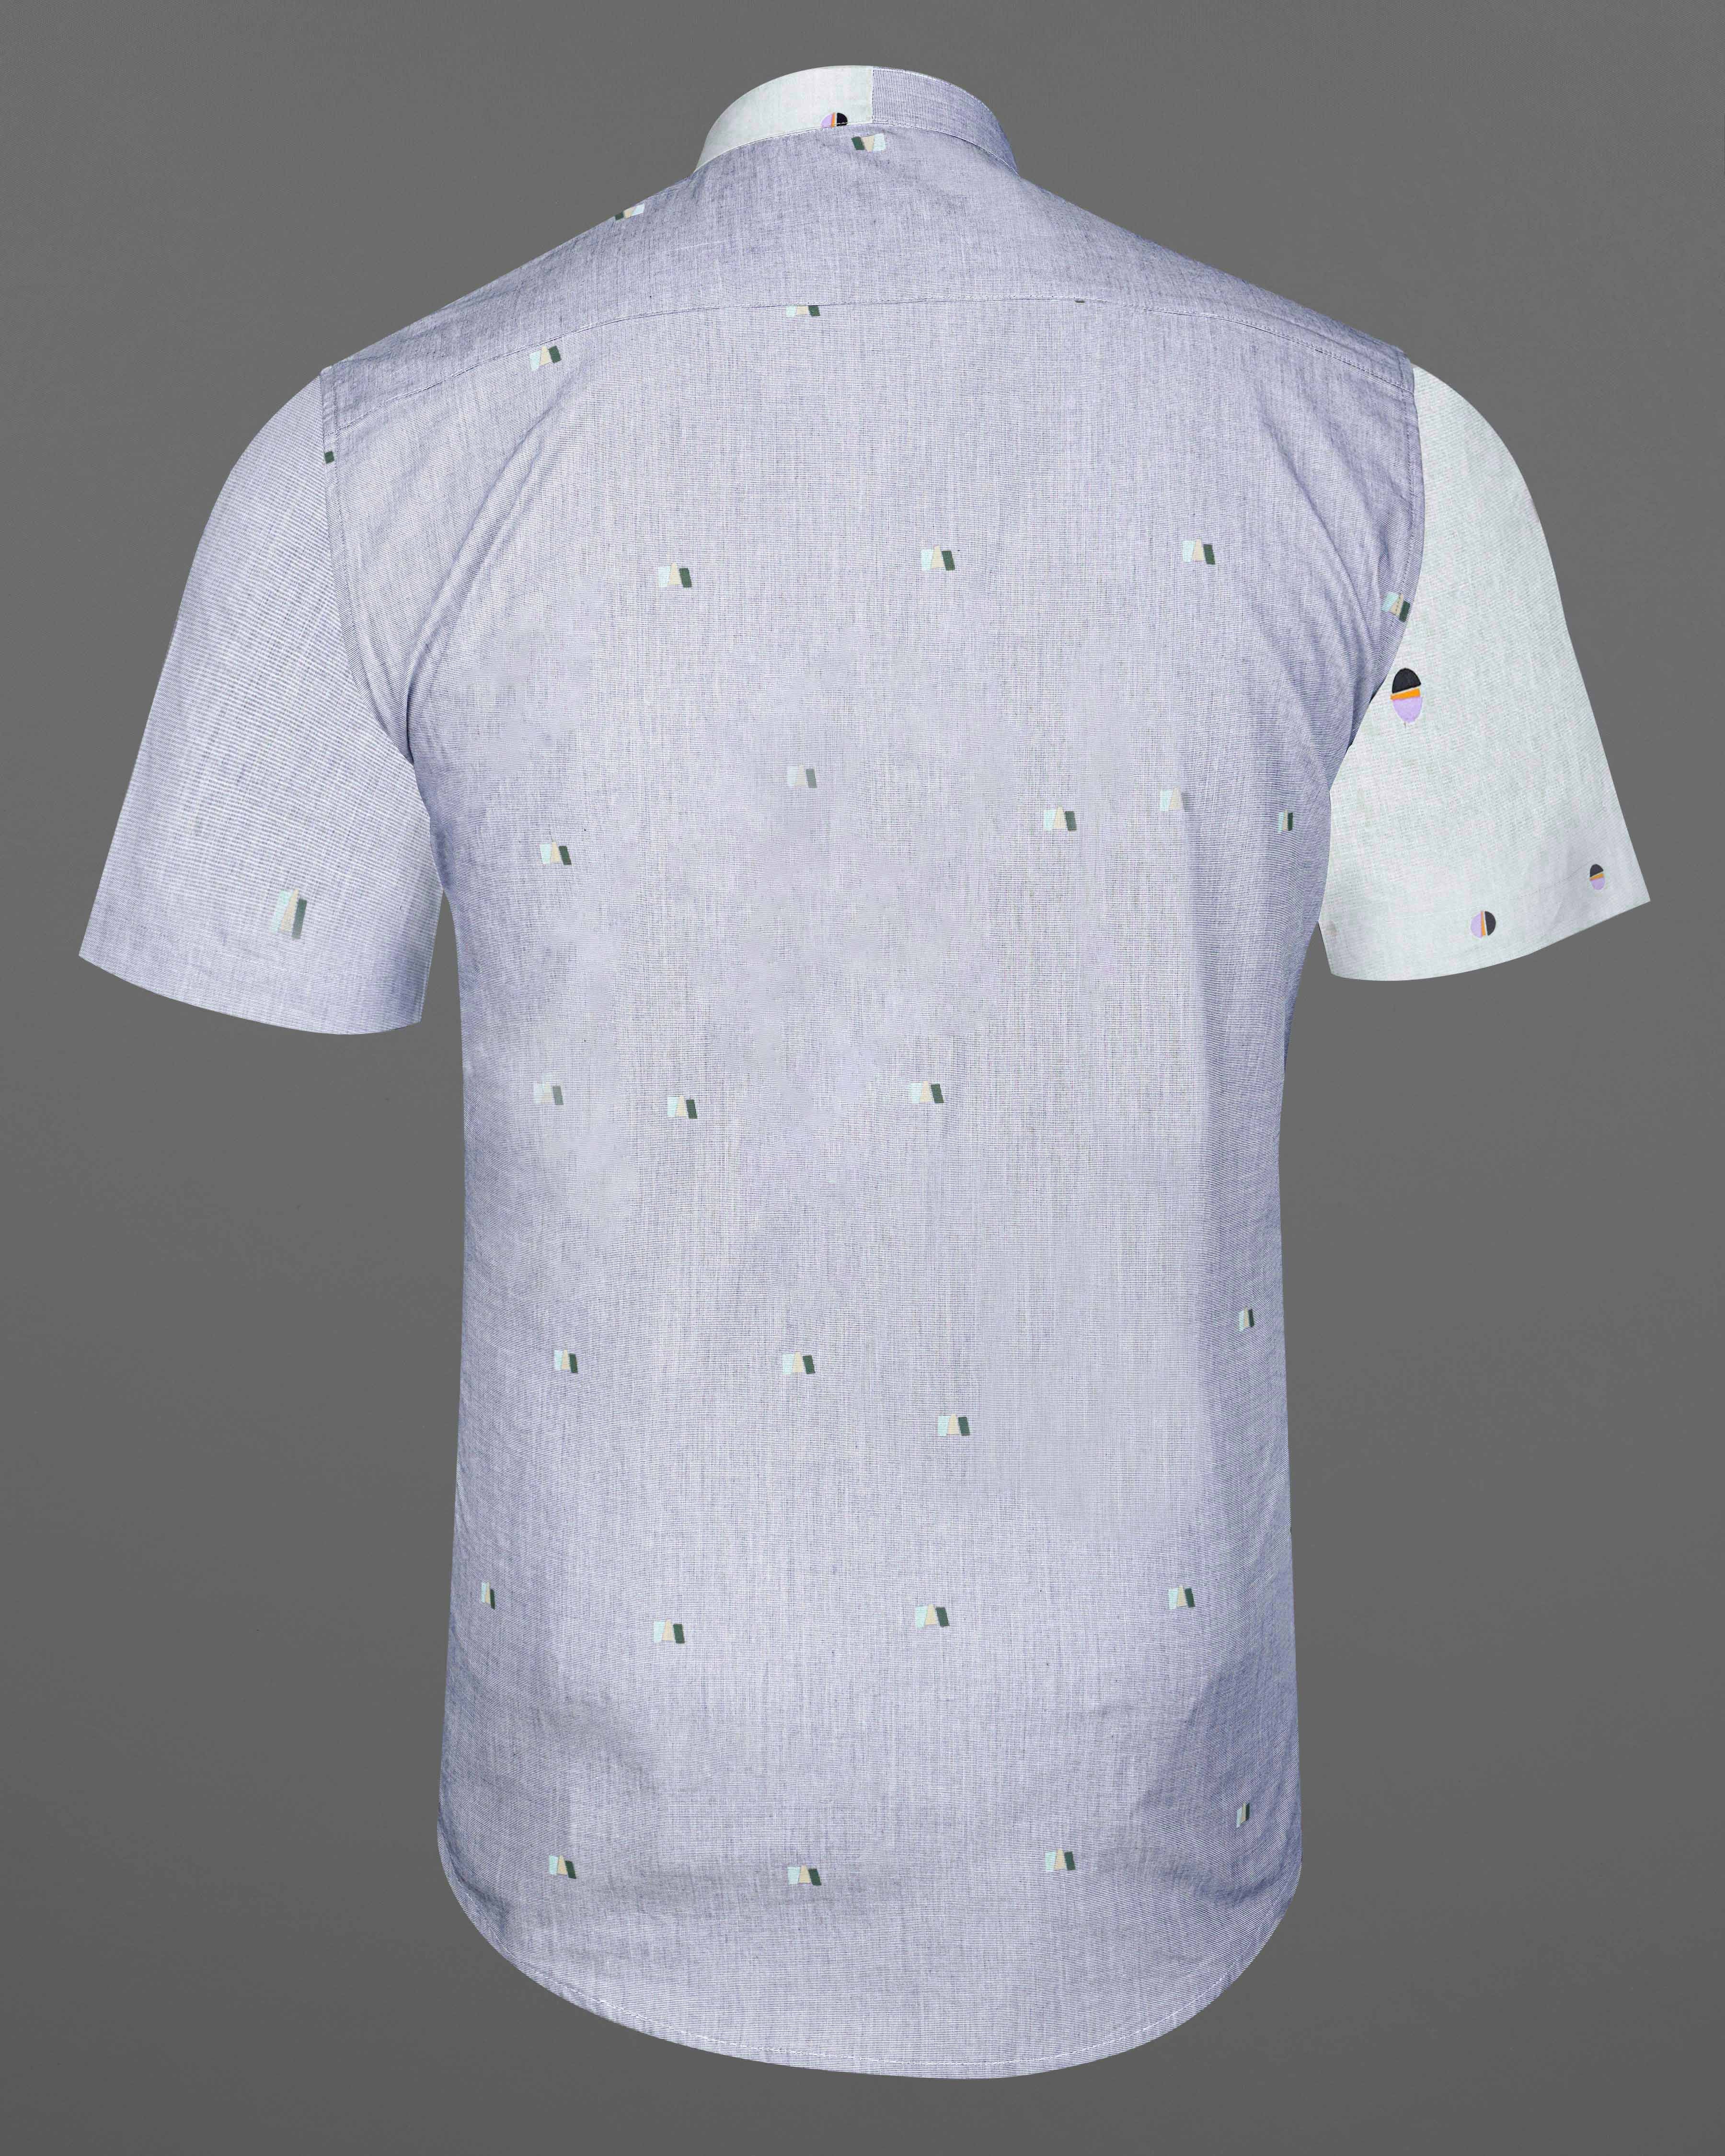 Glaucous Blue with Bright White Printed Chambray Premium Cotton Shirt 8298-P105 -38,8298-P105 -H-38,8298-P105 -39,8298-P105 -H-39,8298-P105 -40,8298-P105 -H-40,8298-P105 -42,8298-P105 -H-42,8298-P105 -44,8298-P105 -H-44,8298-P105 -46,8298-P105 -H-46,8298-P105 -48,8298-P105 -H-48,8298-P105 -50,8298-P105 -H-50,8298-P105 -52,8298-P105 -H-52